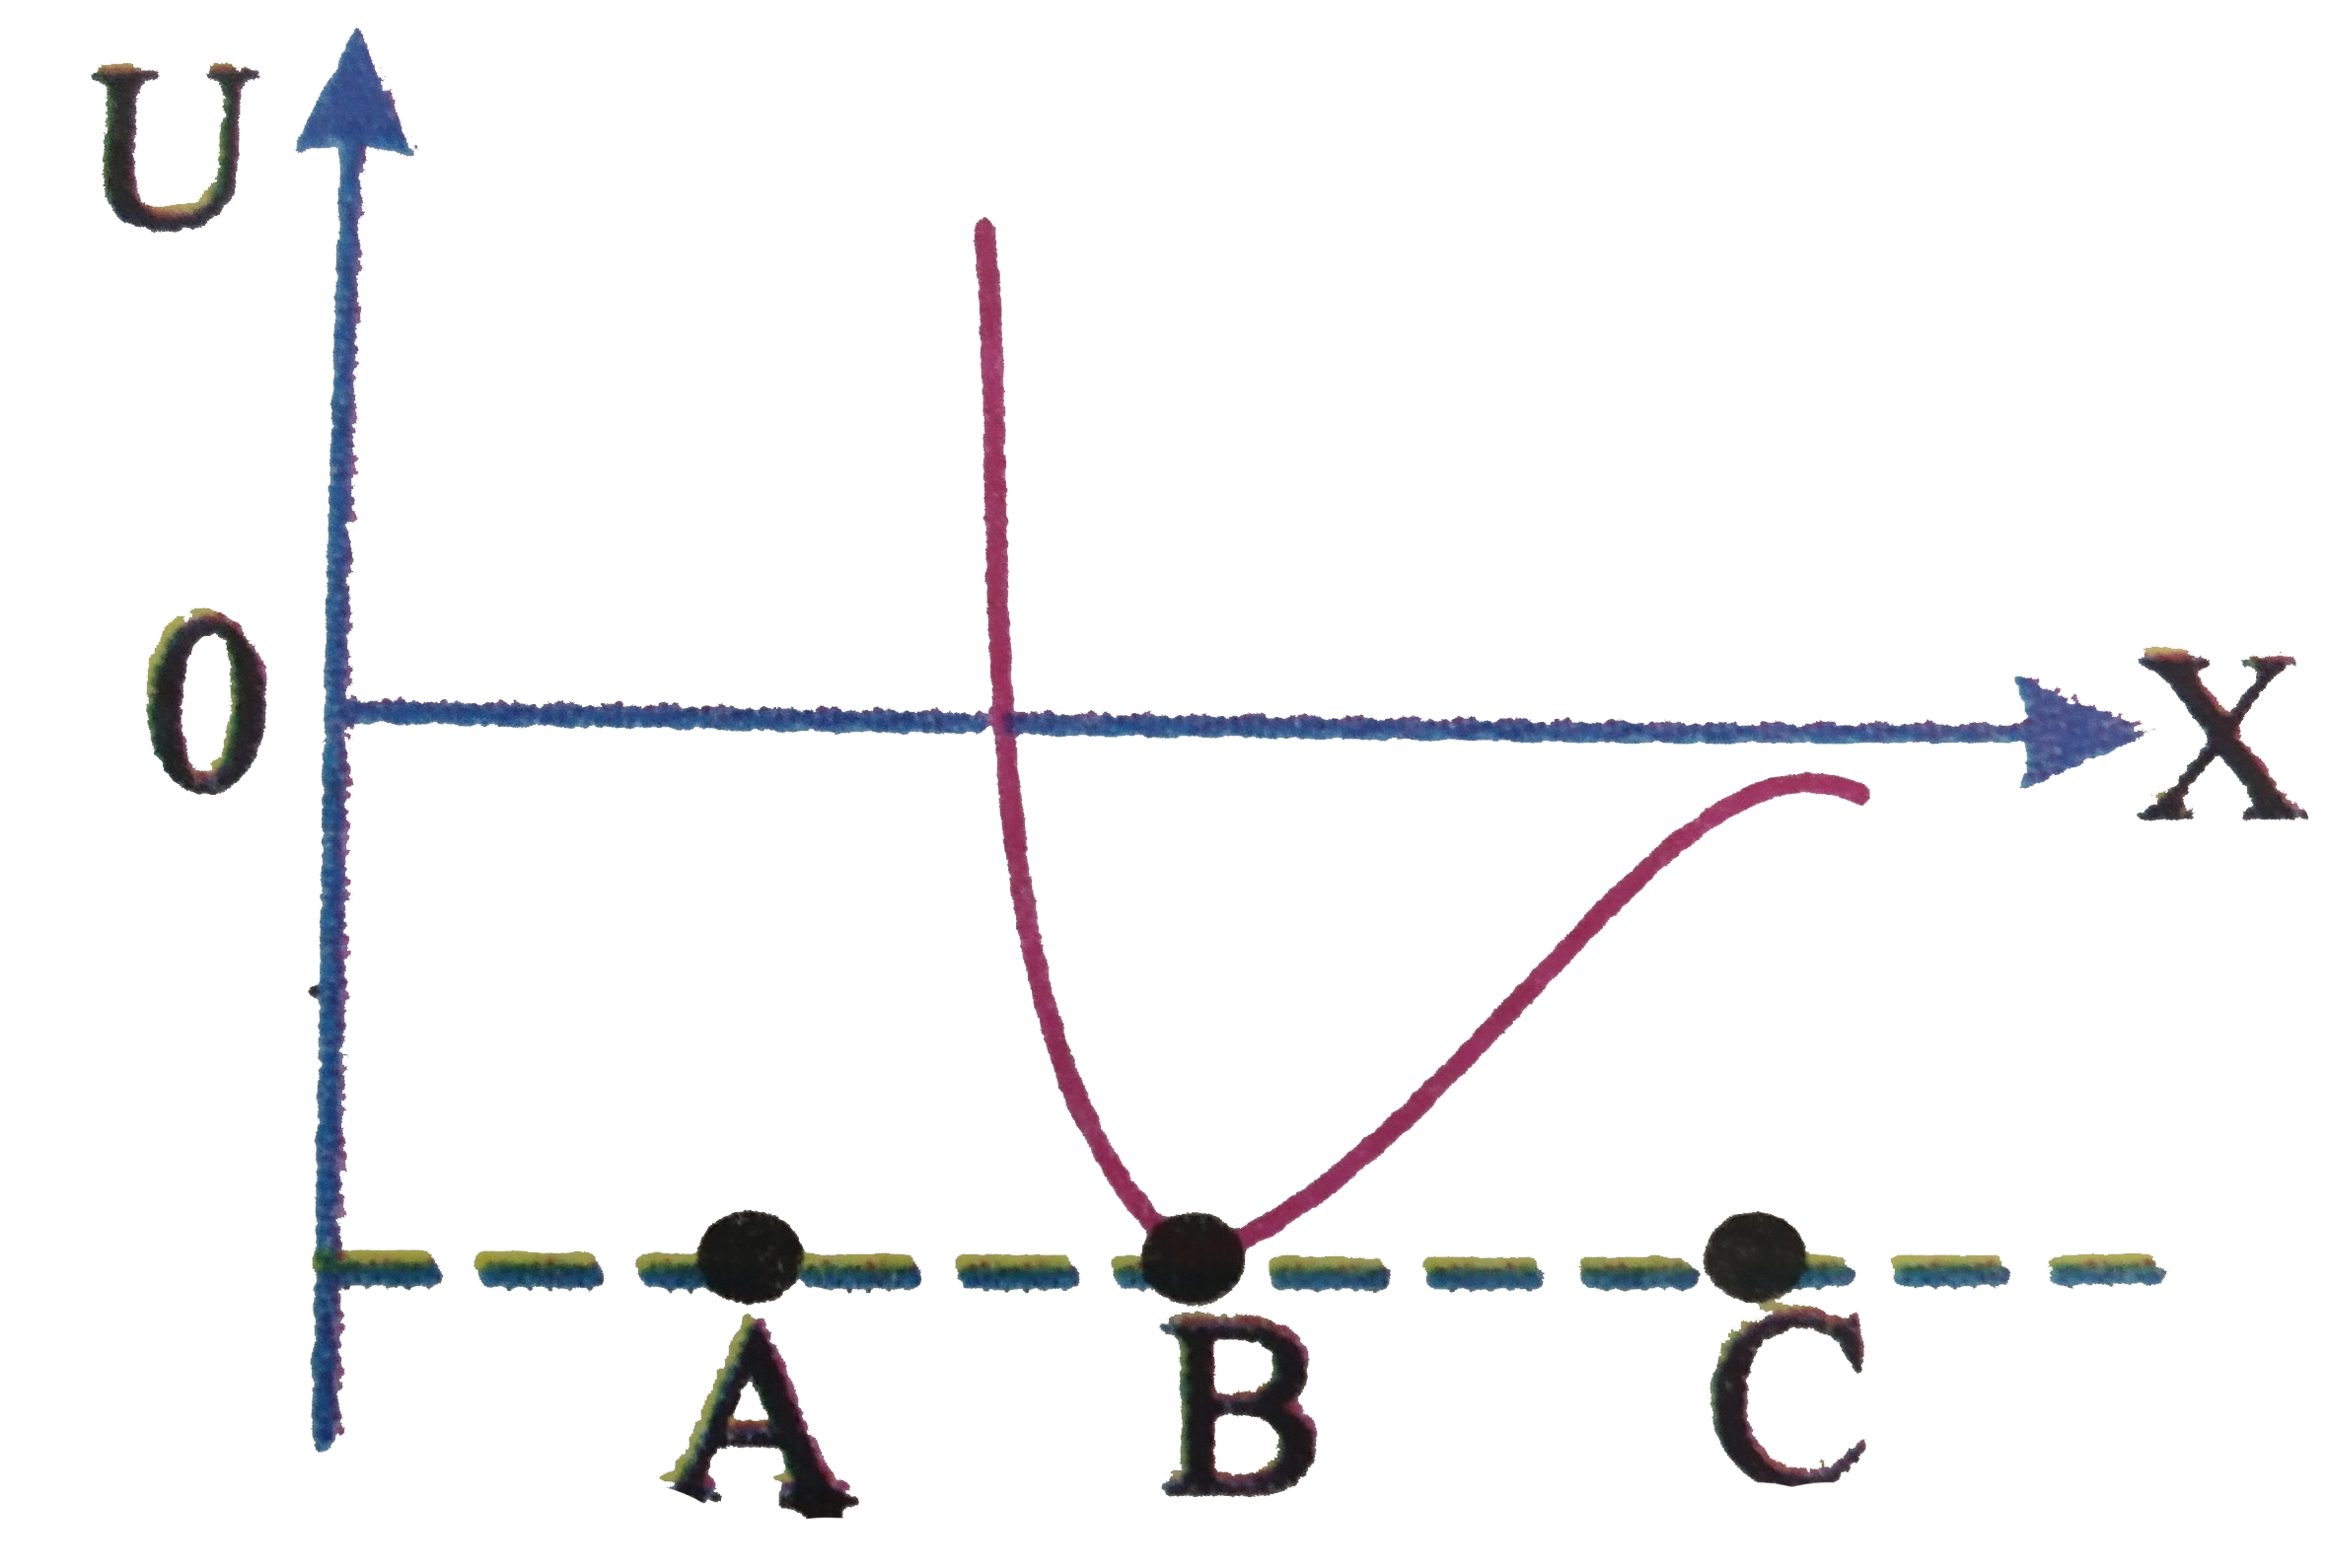 The potential energy U between two molecules as a function  of the distance X between them has been  shown in the figure. The two moleucles are